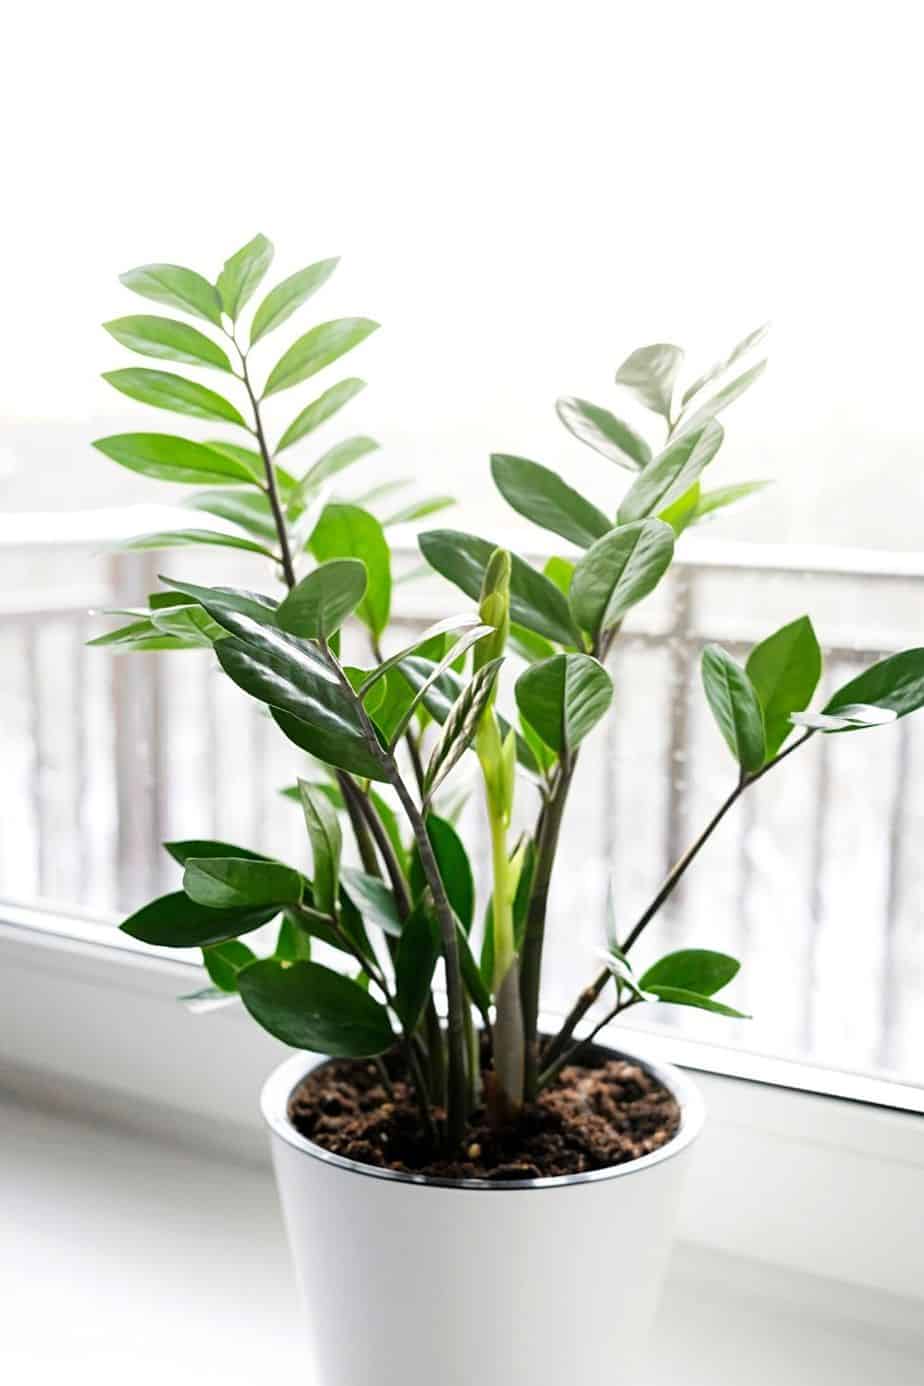 When you place your ZZ plant in an area receiving bright lighting, its leaves will start to burn and drop off